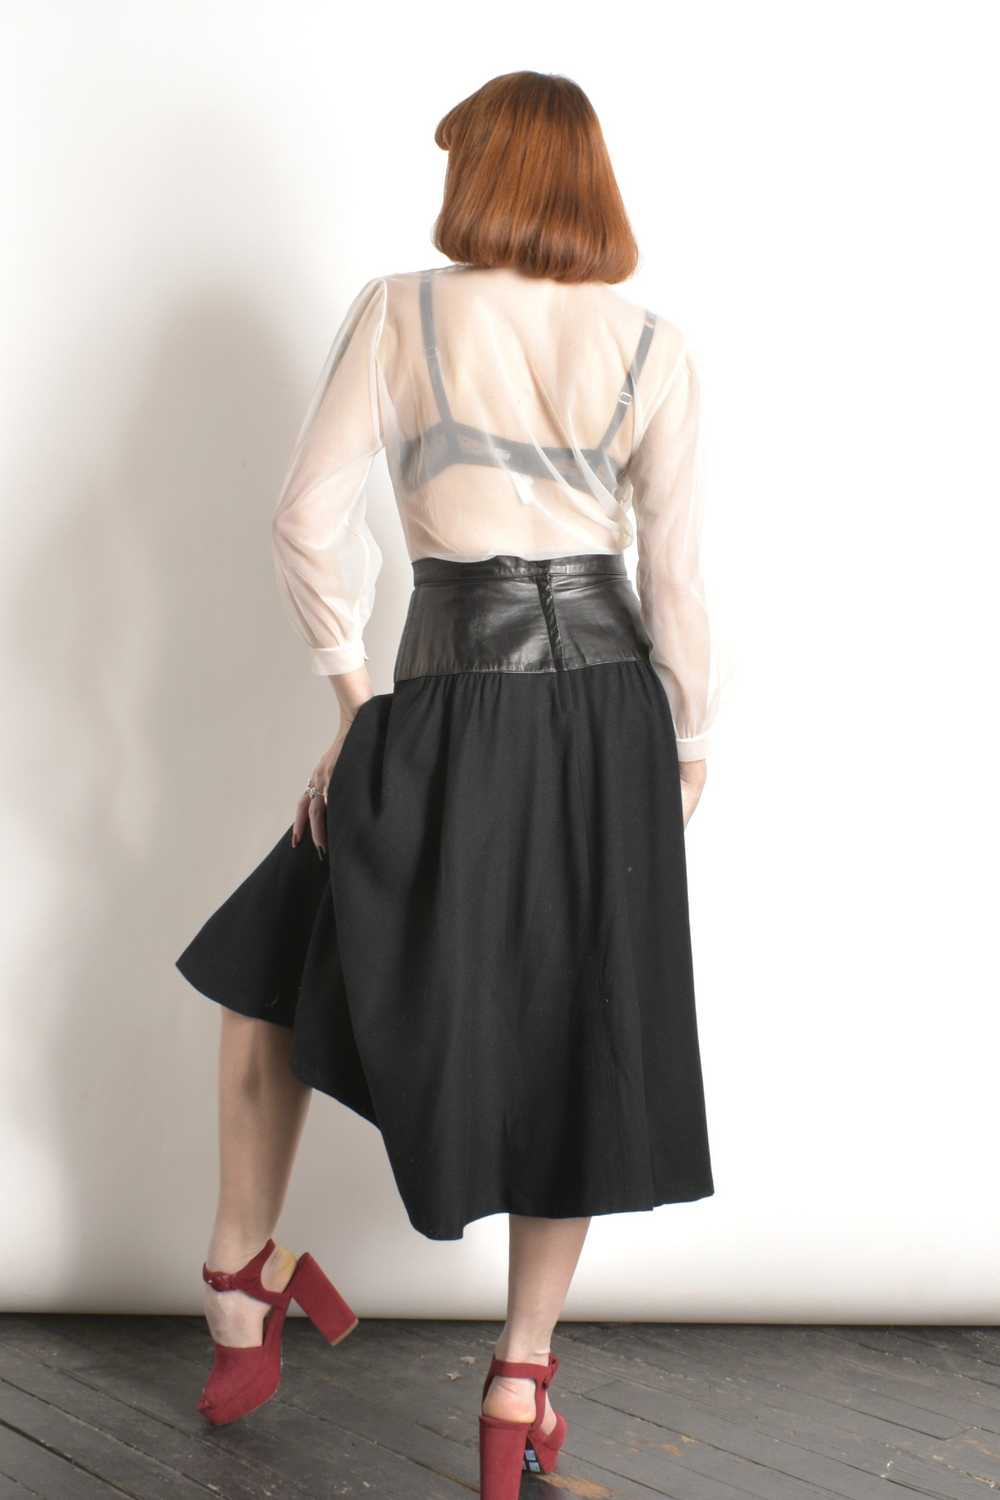 1980s Wool and Leather Skirt-small - image 5